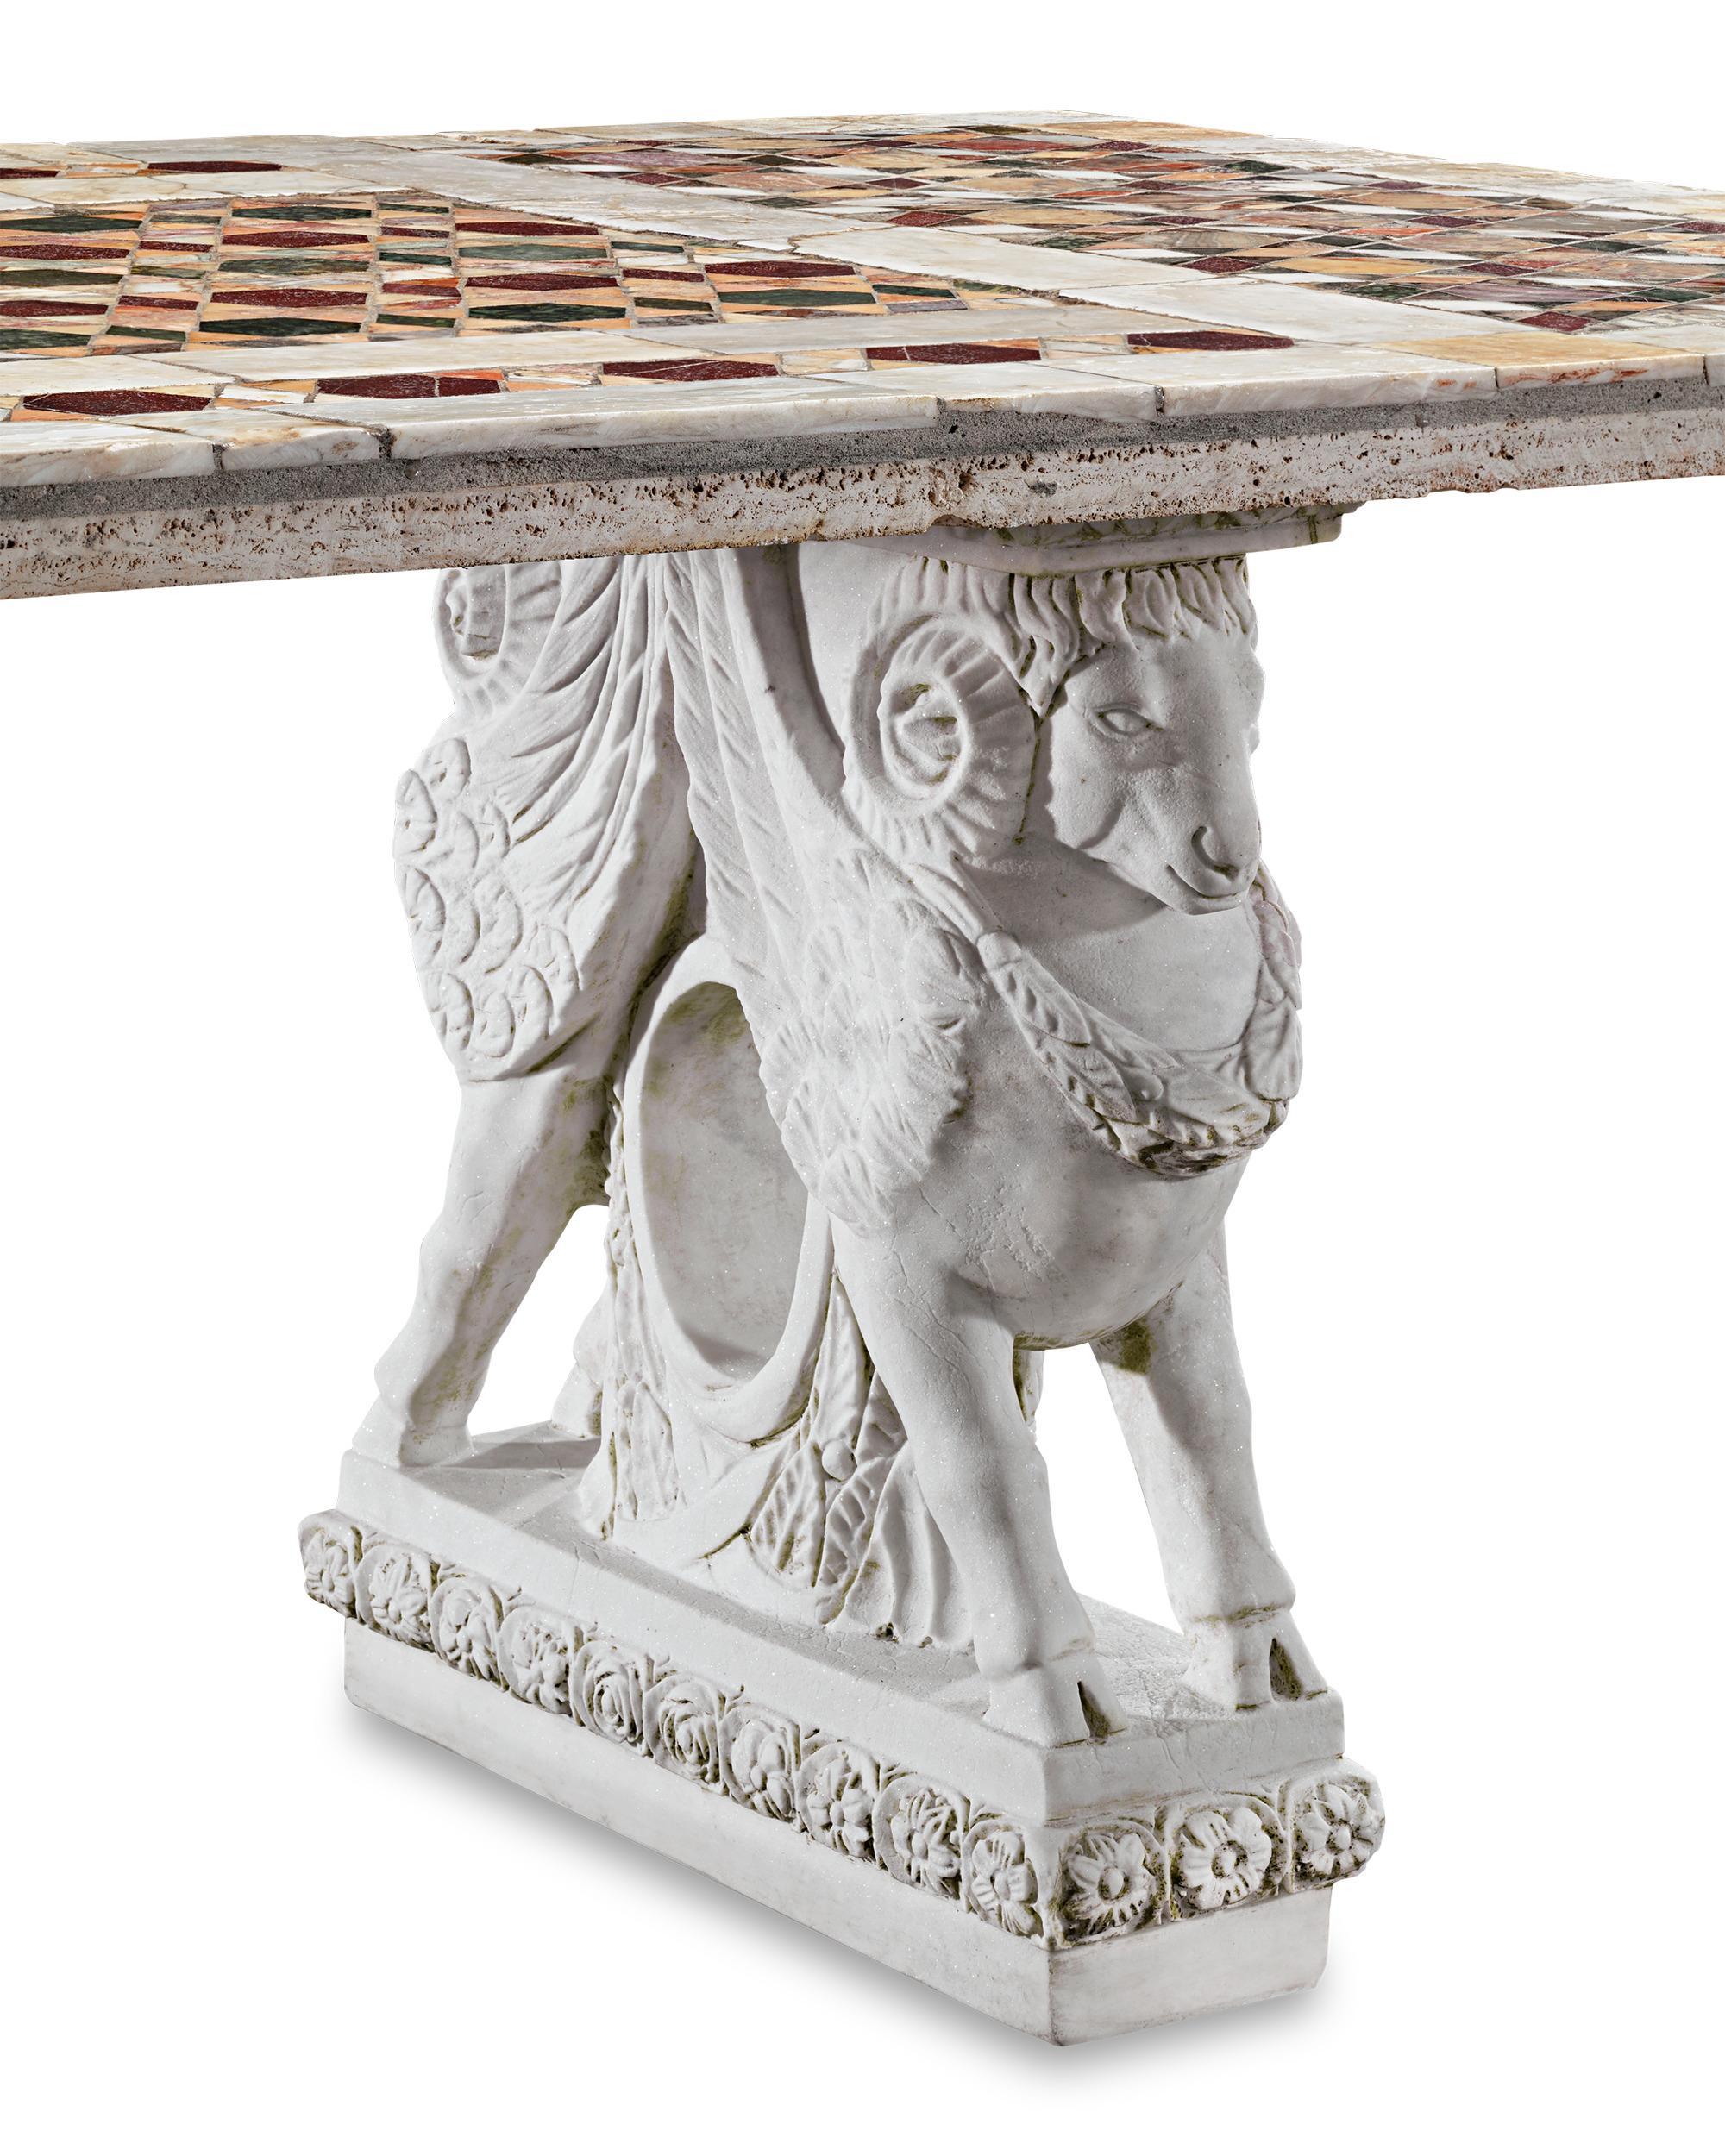 Inlay Roman Empire Opus Sectile Table